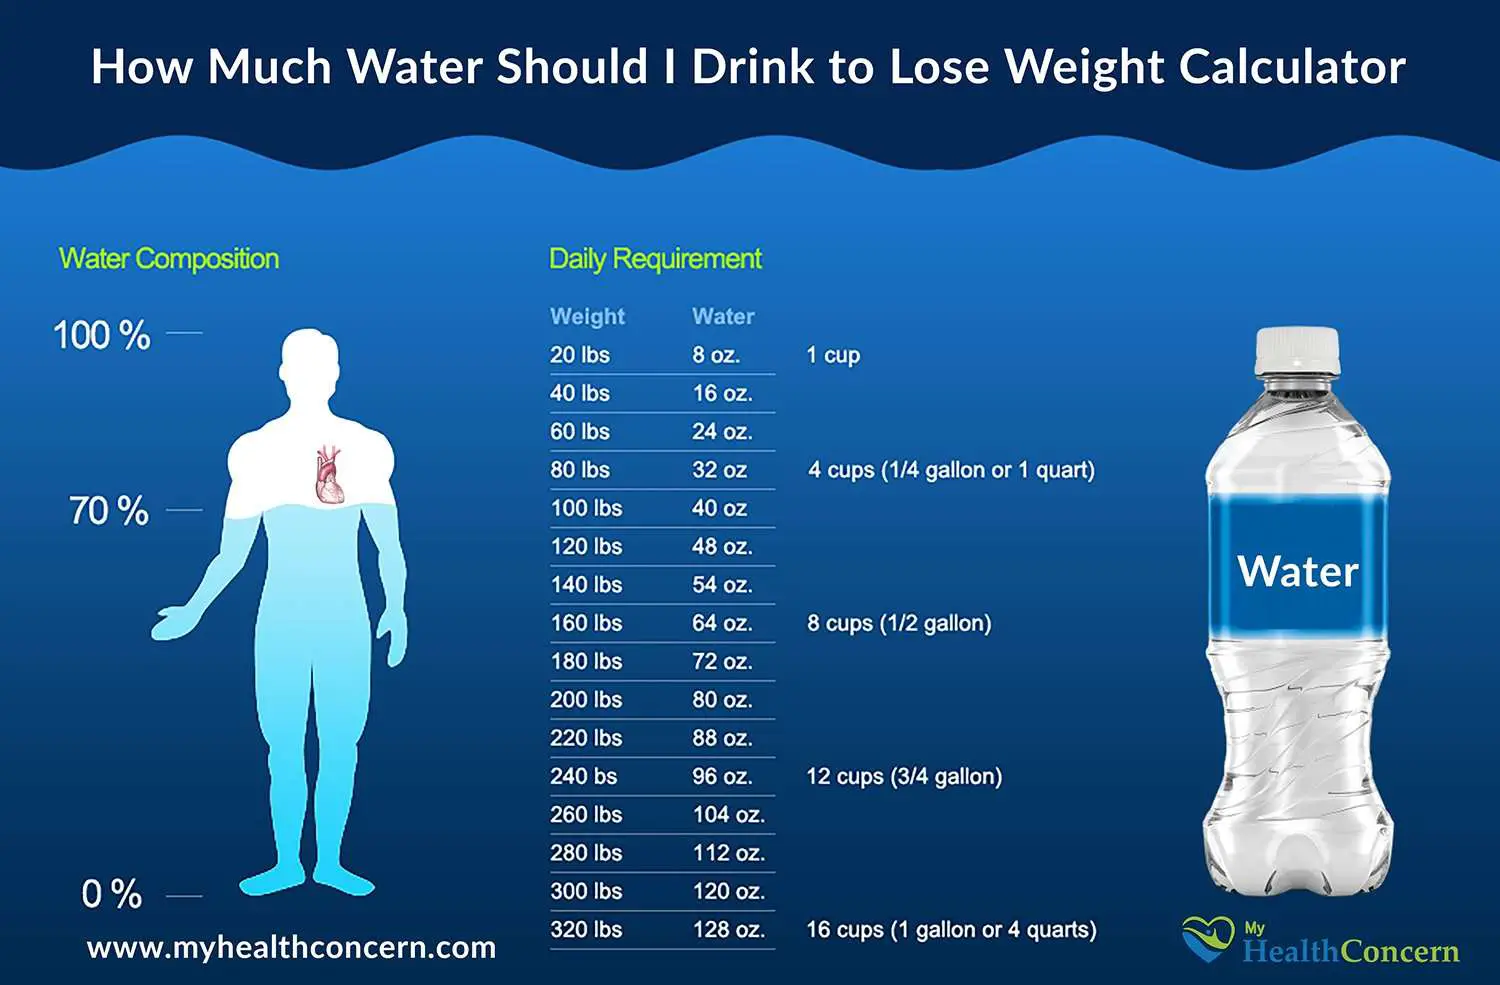 How much water should i drink to lose weight